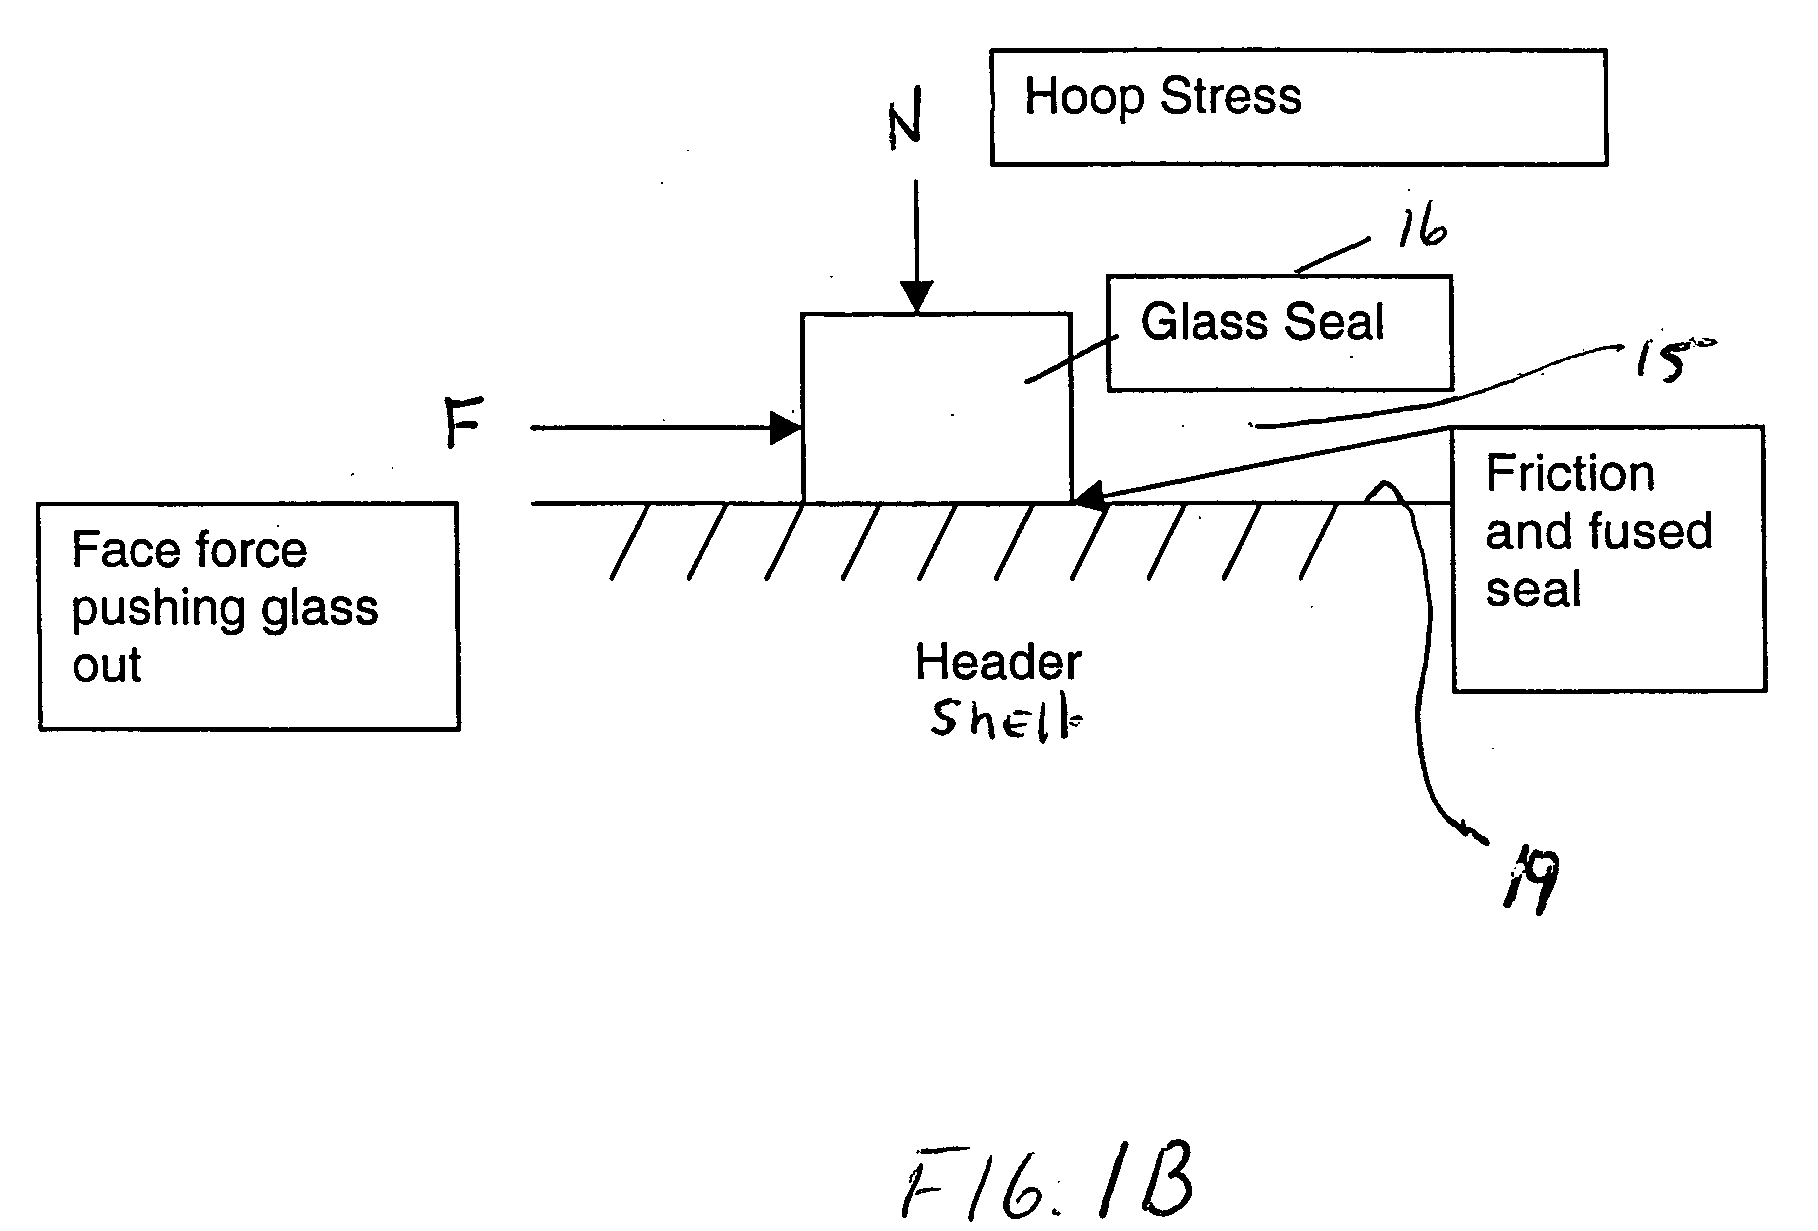 Method of joining a pressure sensor header with an associated transducer element